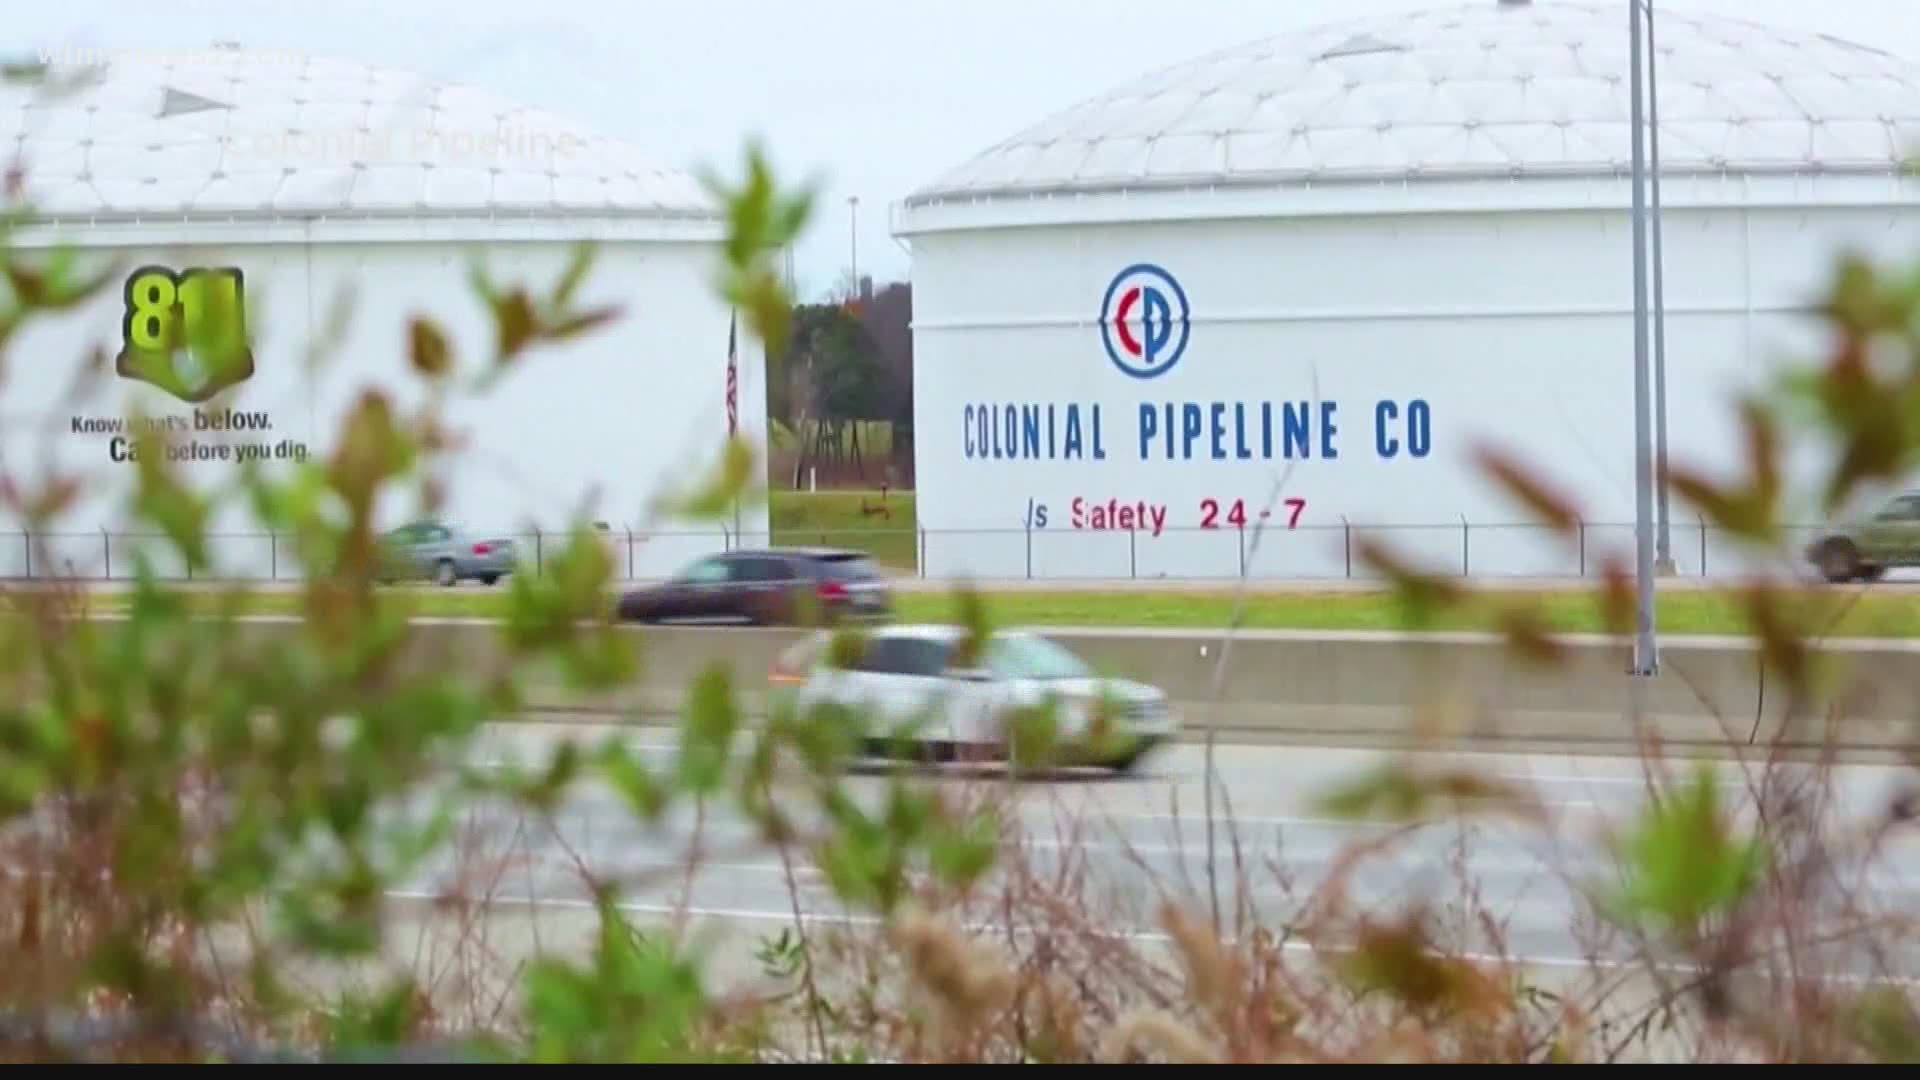 A cyber attack at Colonial Pipeline could raise gas prices if supply is impacted.